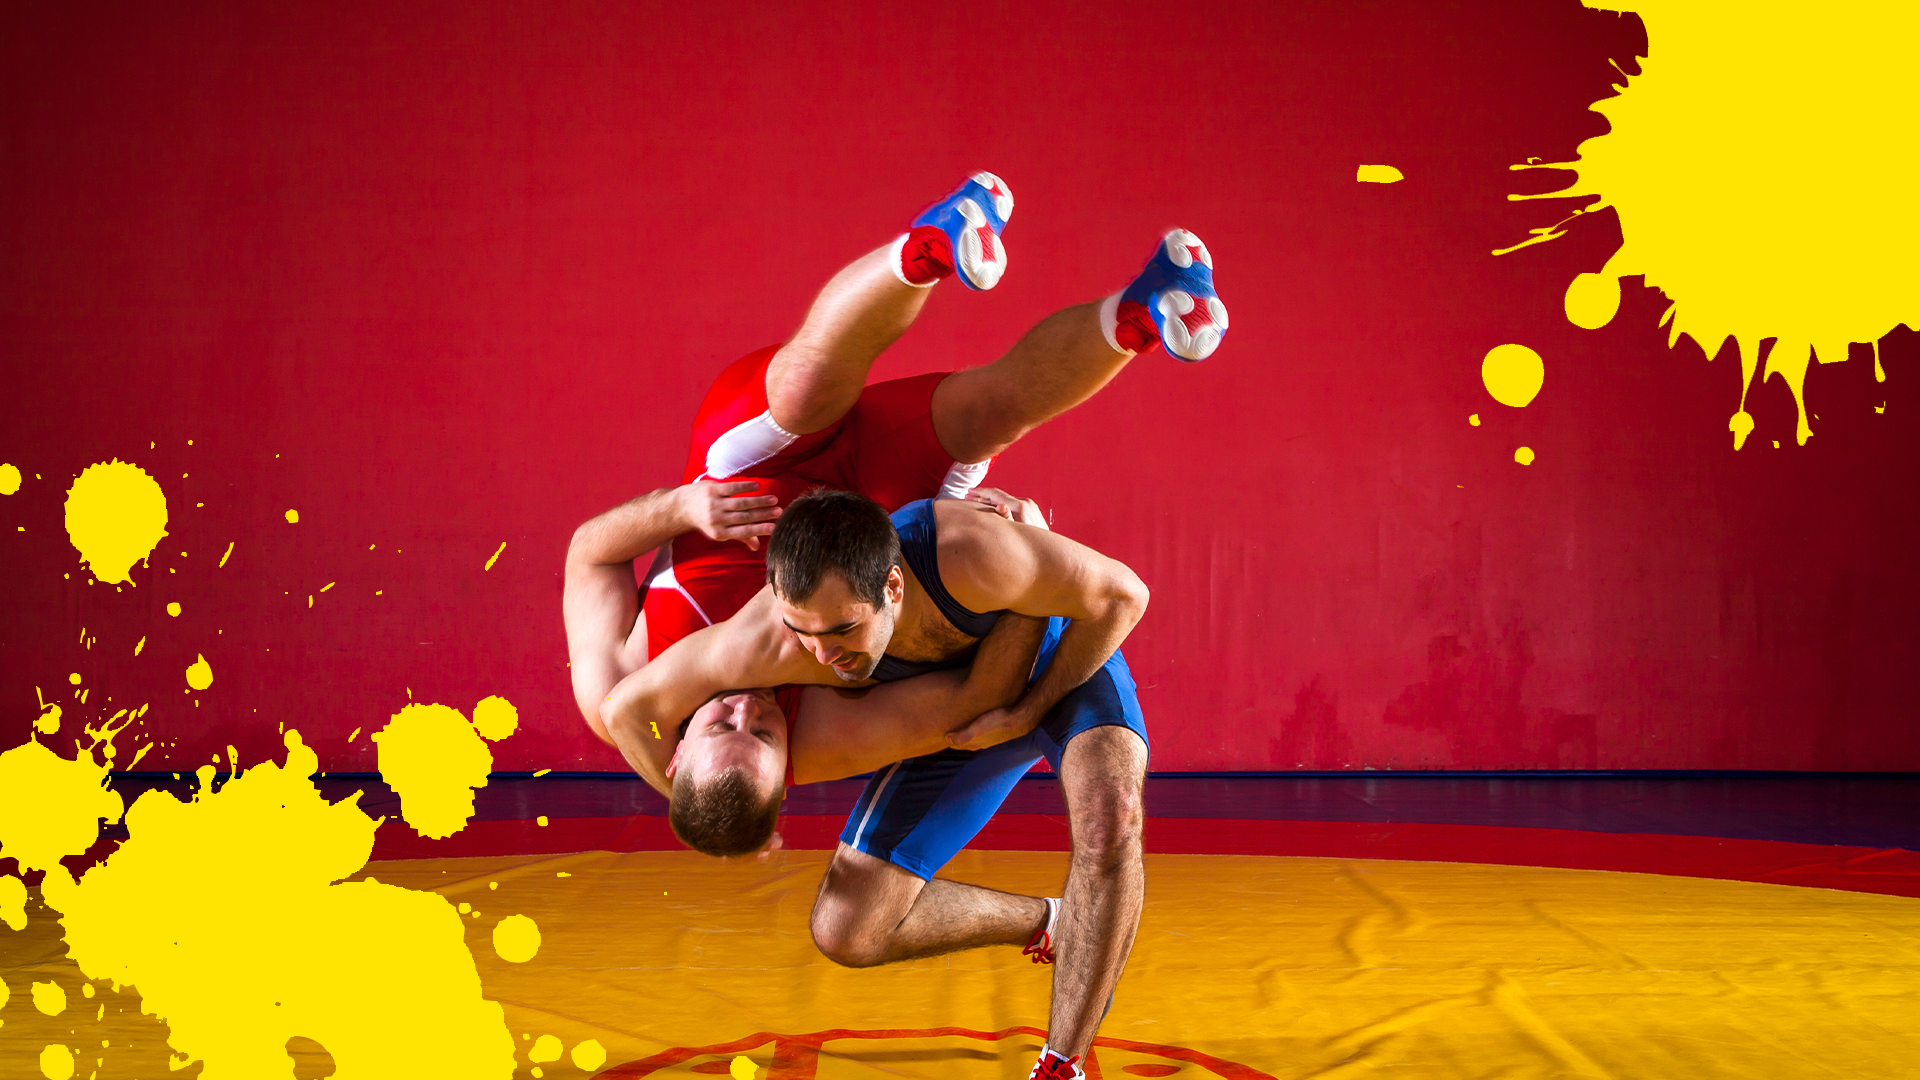 Two wrestlers and splats